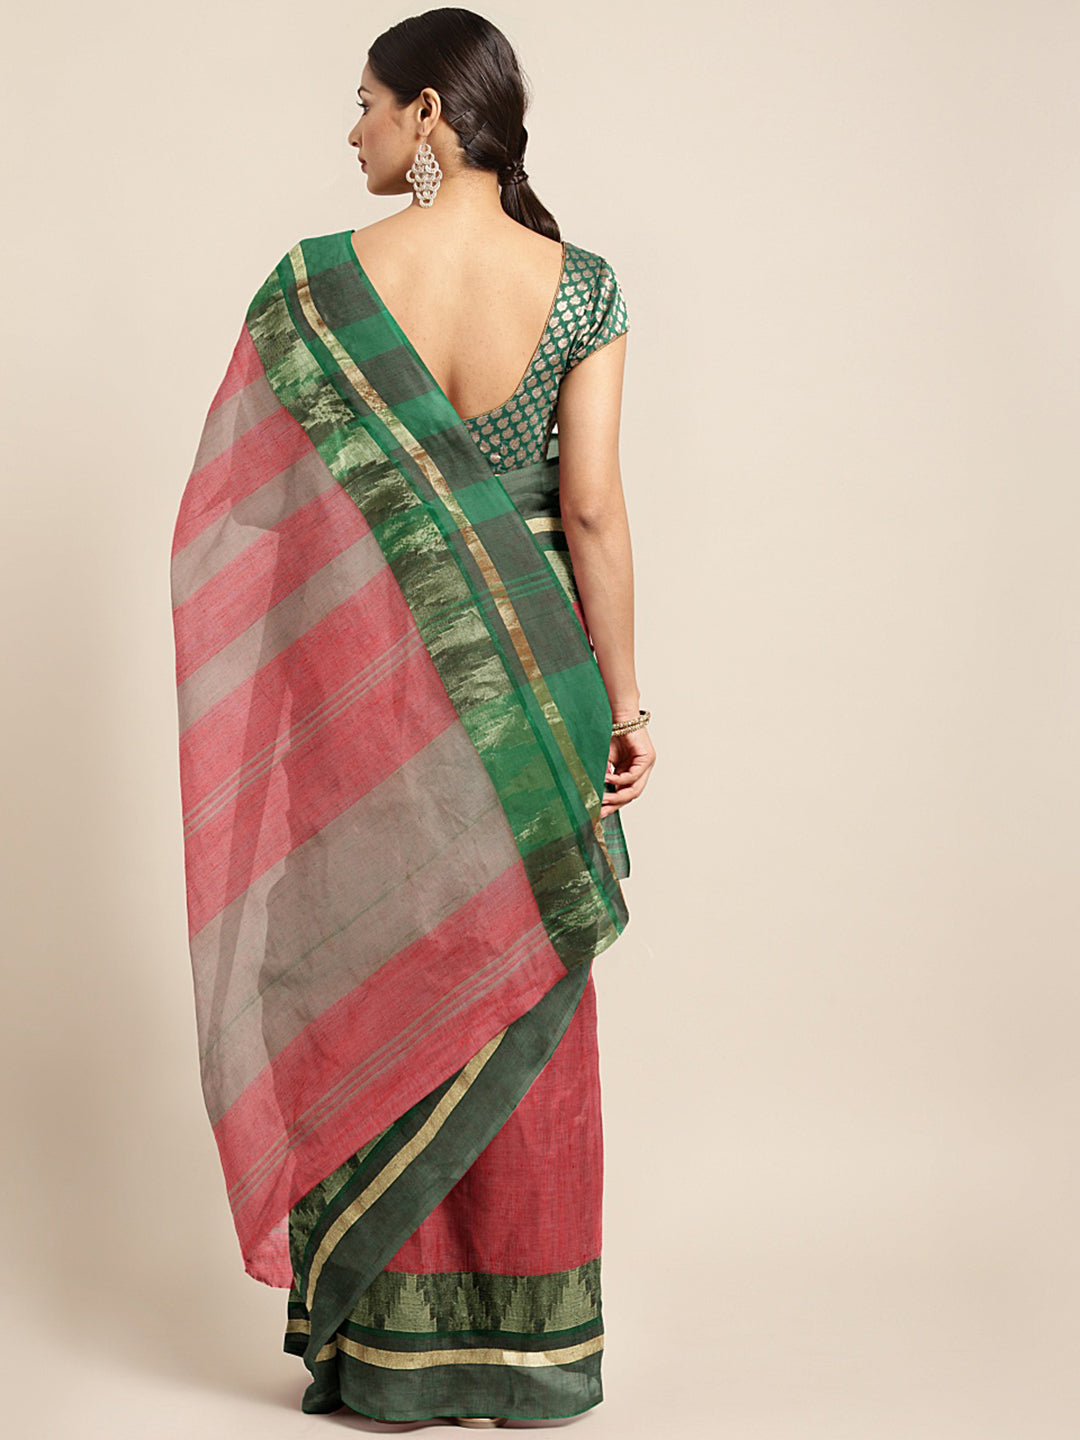 Red Tant Woven Design Saree Without Blouse Piece DUTASA040 DUTASA040-Saree-Kalakari India-DUTASA040-Geographical Indication, Hand Crafted, Heritage Prints, Natural Dyes, Sarees, Silk Cotton, Sustainable Fabrics, Taant, Tant, West Bengal, Woven-[Linen,Ethnic,wear,Fashionista,Handloom,Handicraft,Indigo,blockprint,block,print,Cotton,Chanderi,Blue, latest,classy,party,bollywood,trendy,summer,style,traditional,formal,elegant,unique,style,hand,block,print, dabu,booti,gift,present,glamorous,affordable,